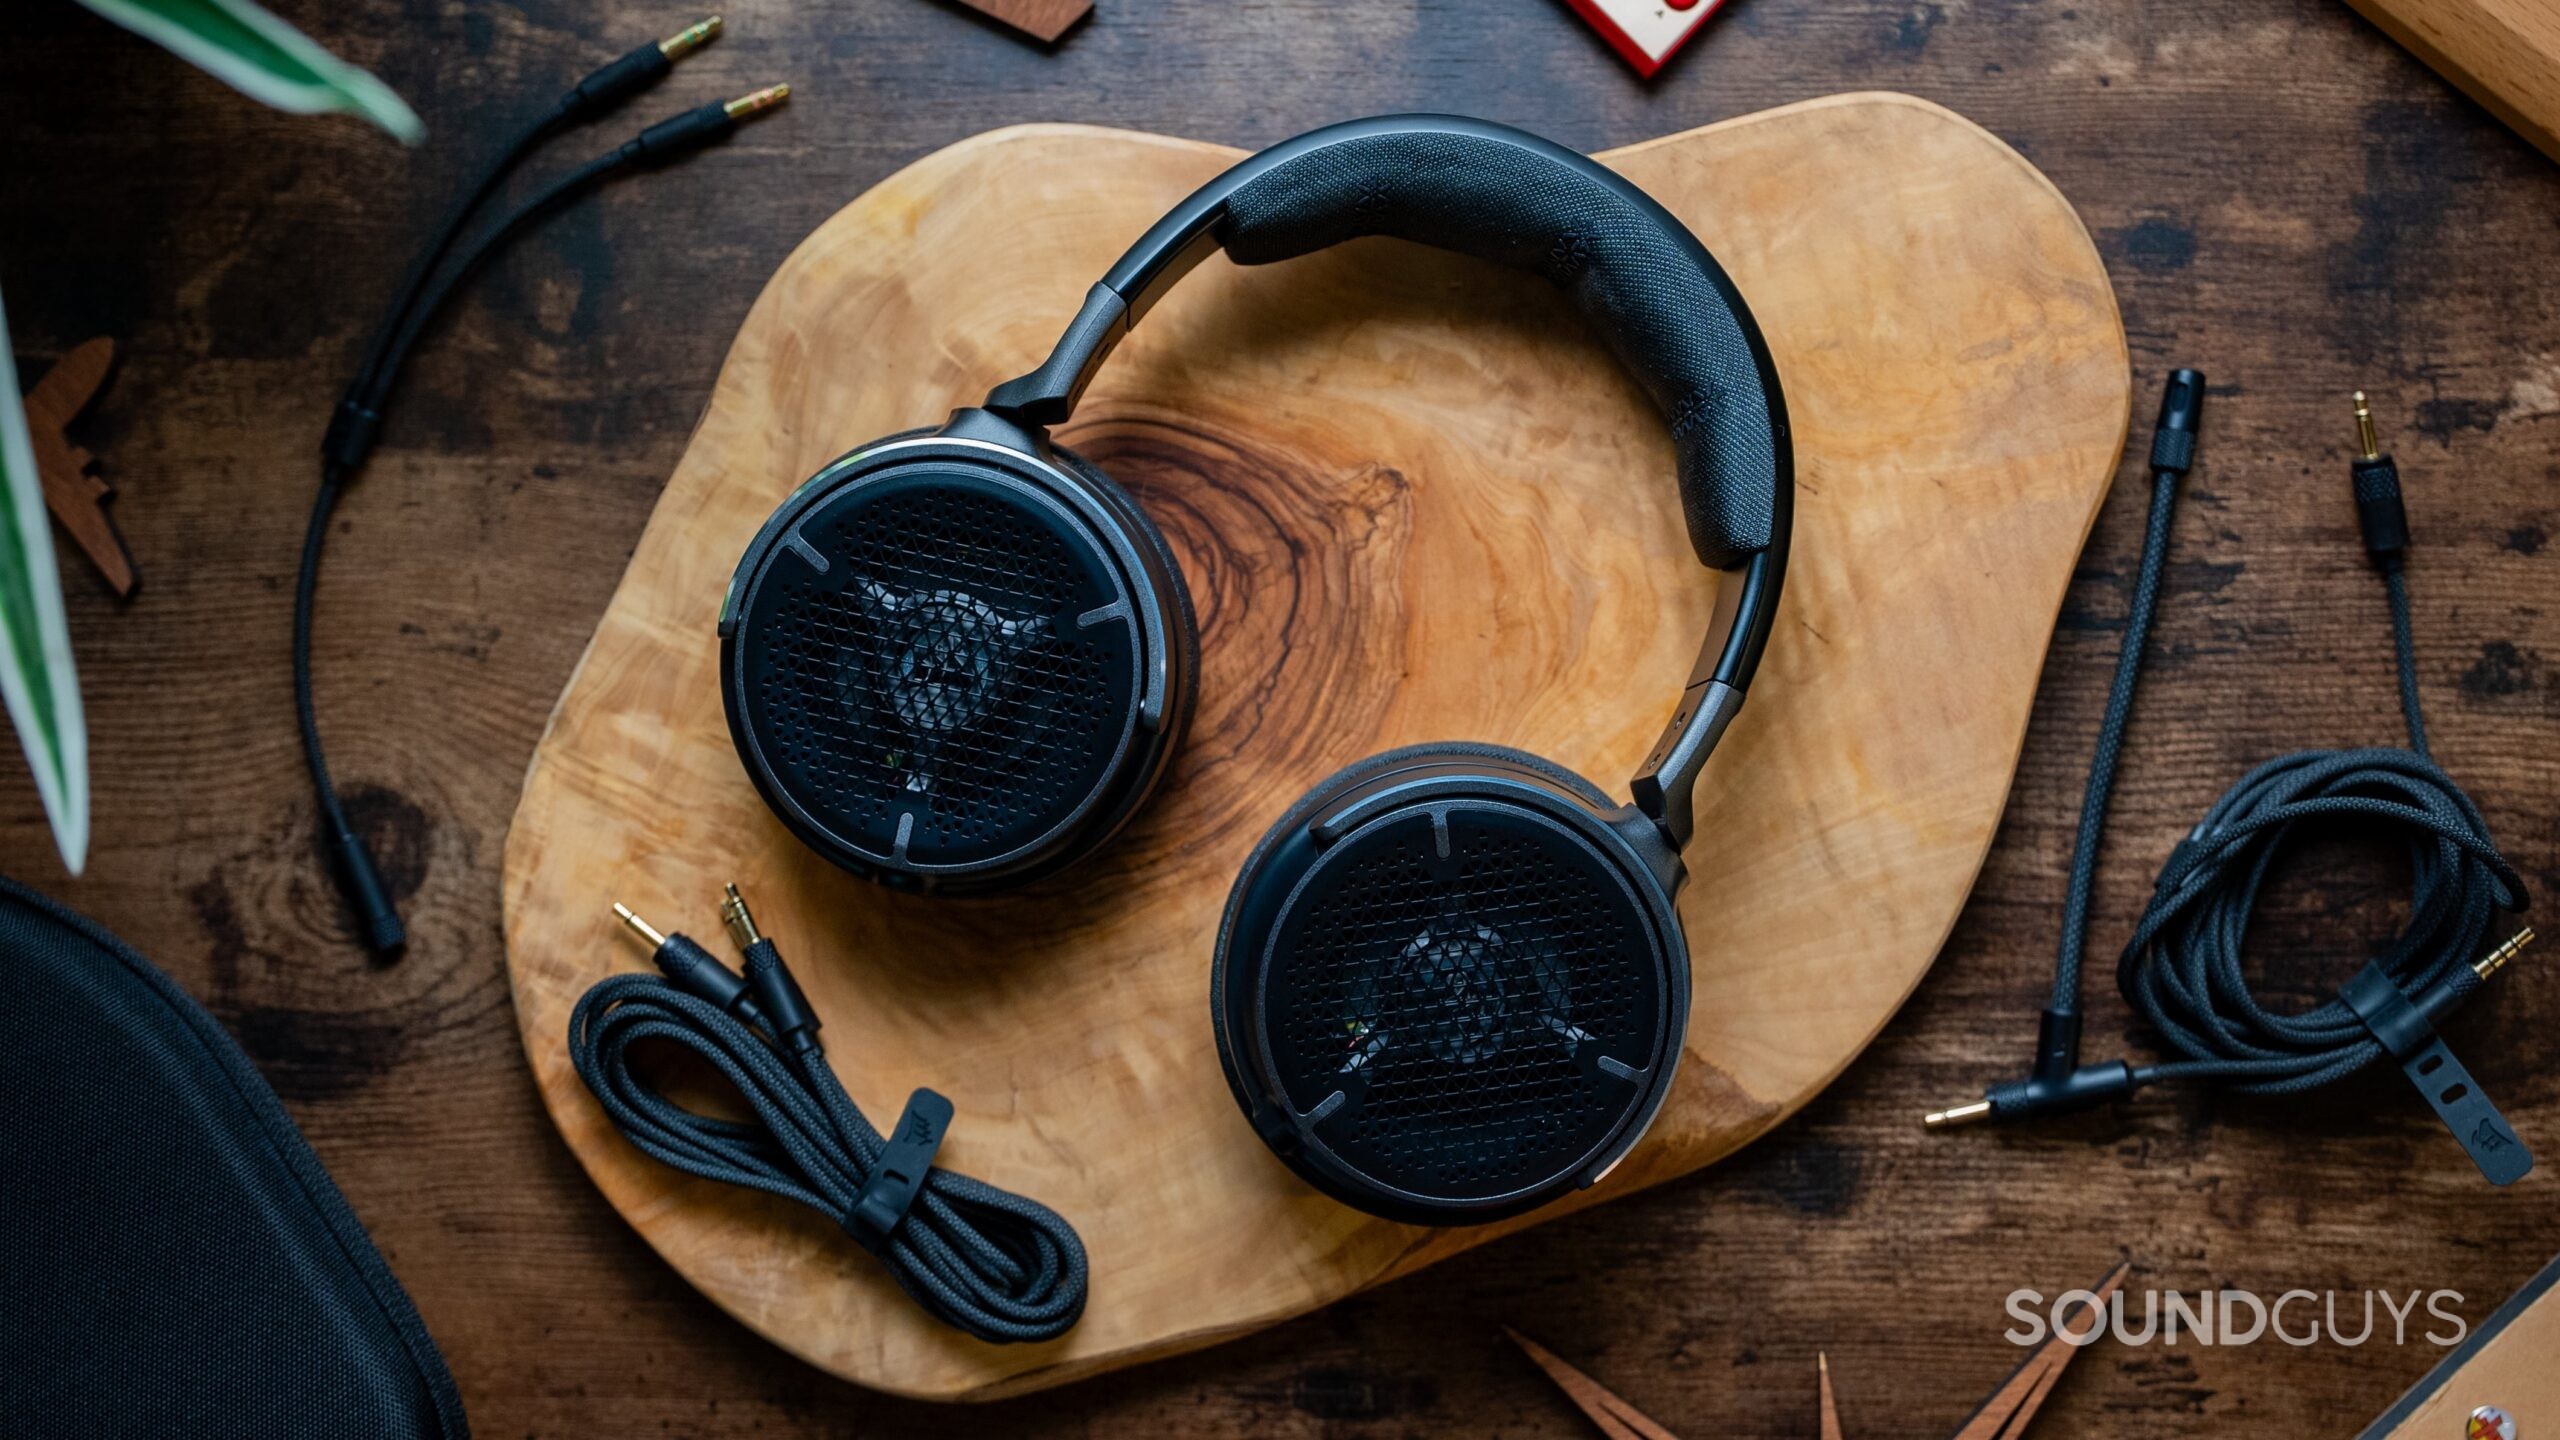 The Corsair VIRTUOSO PRO headset next to its included cables.